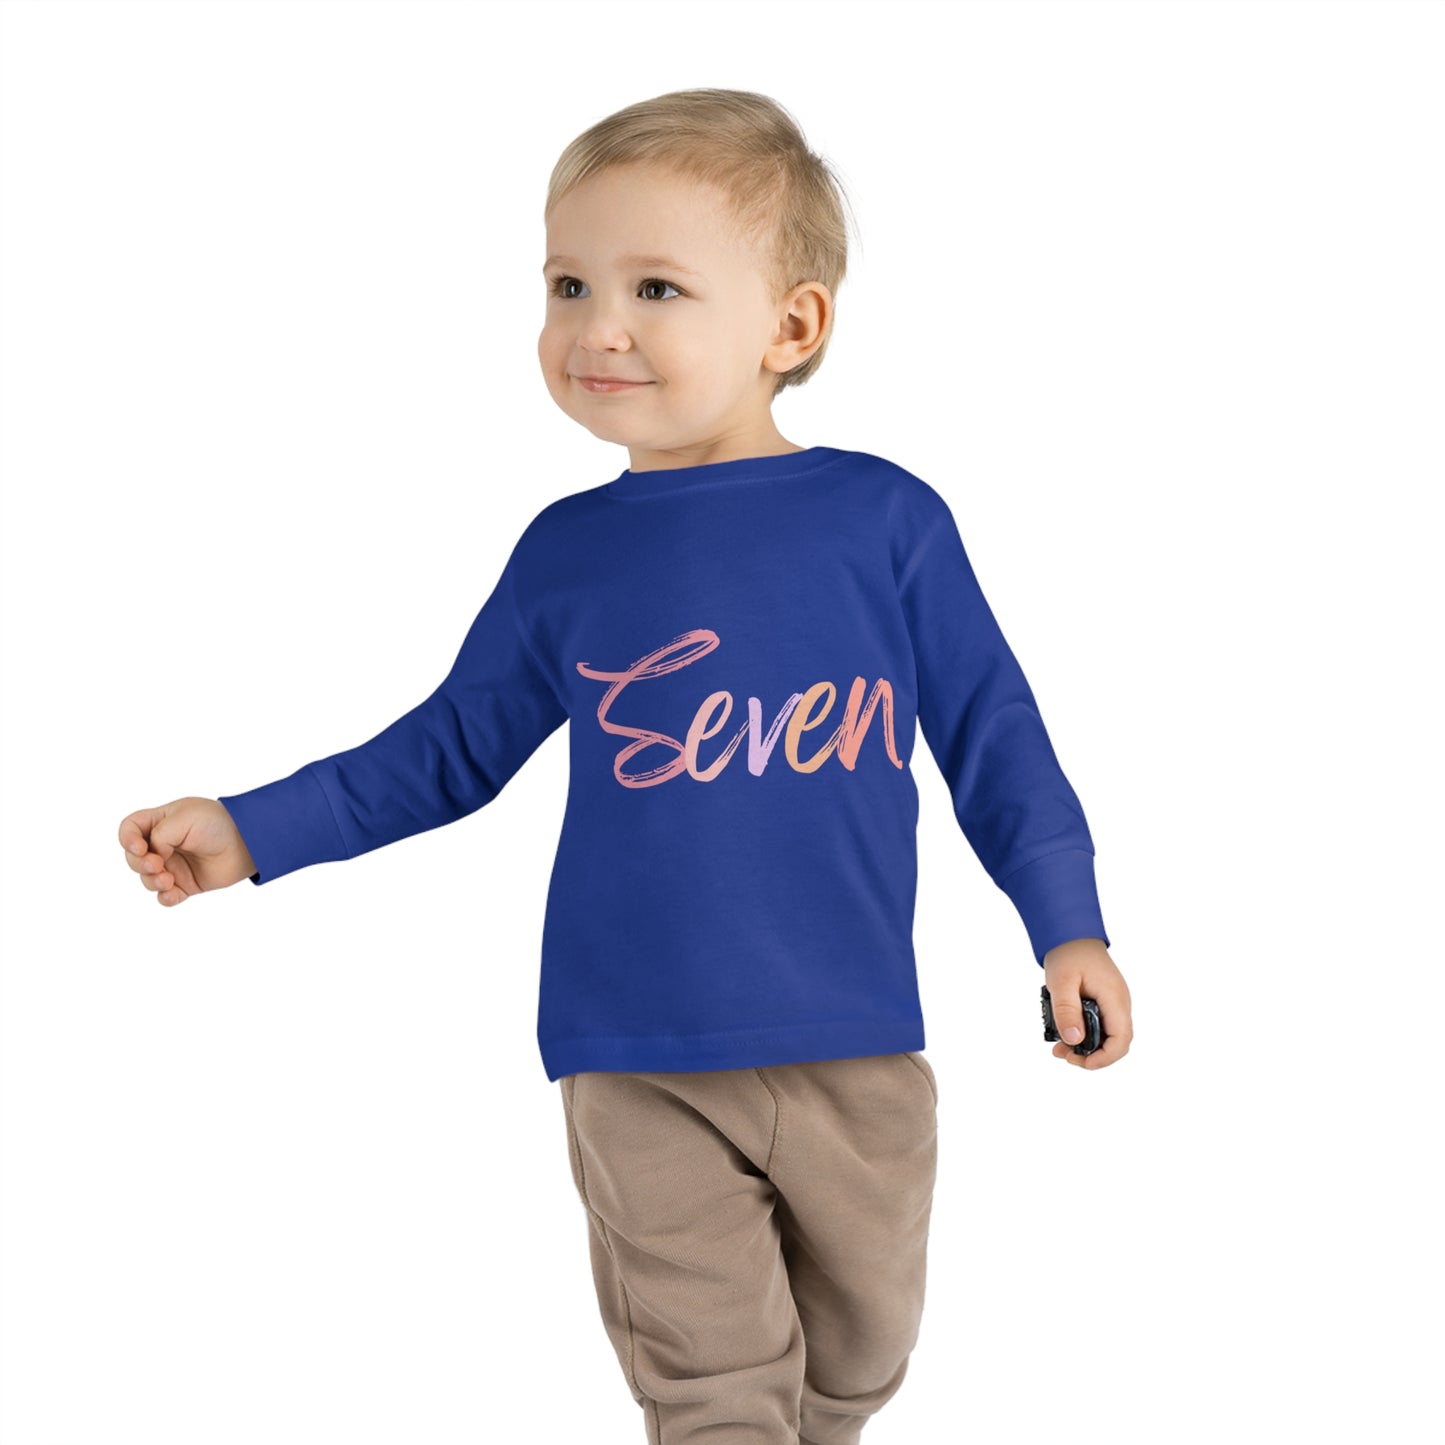 Long Sleeve Age Tee Shirt For 7 Year Old Unisex Kids